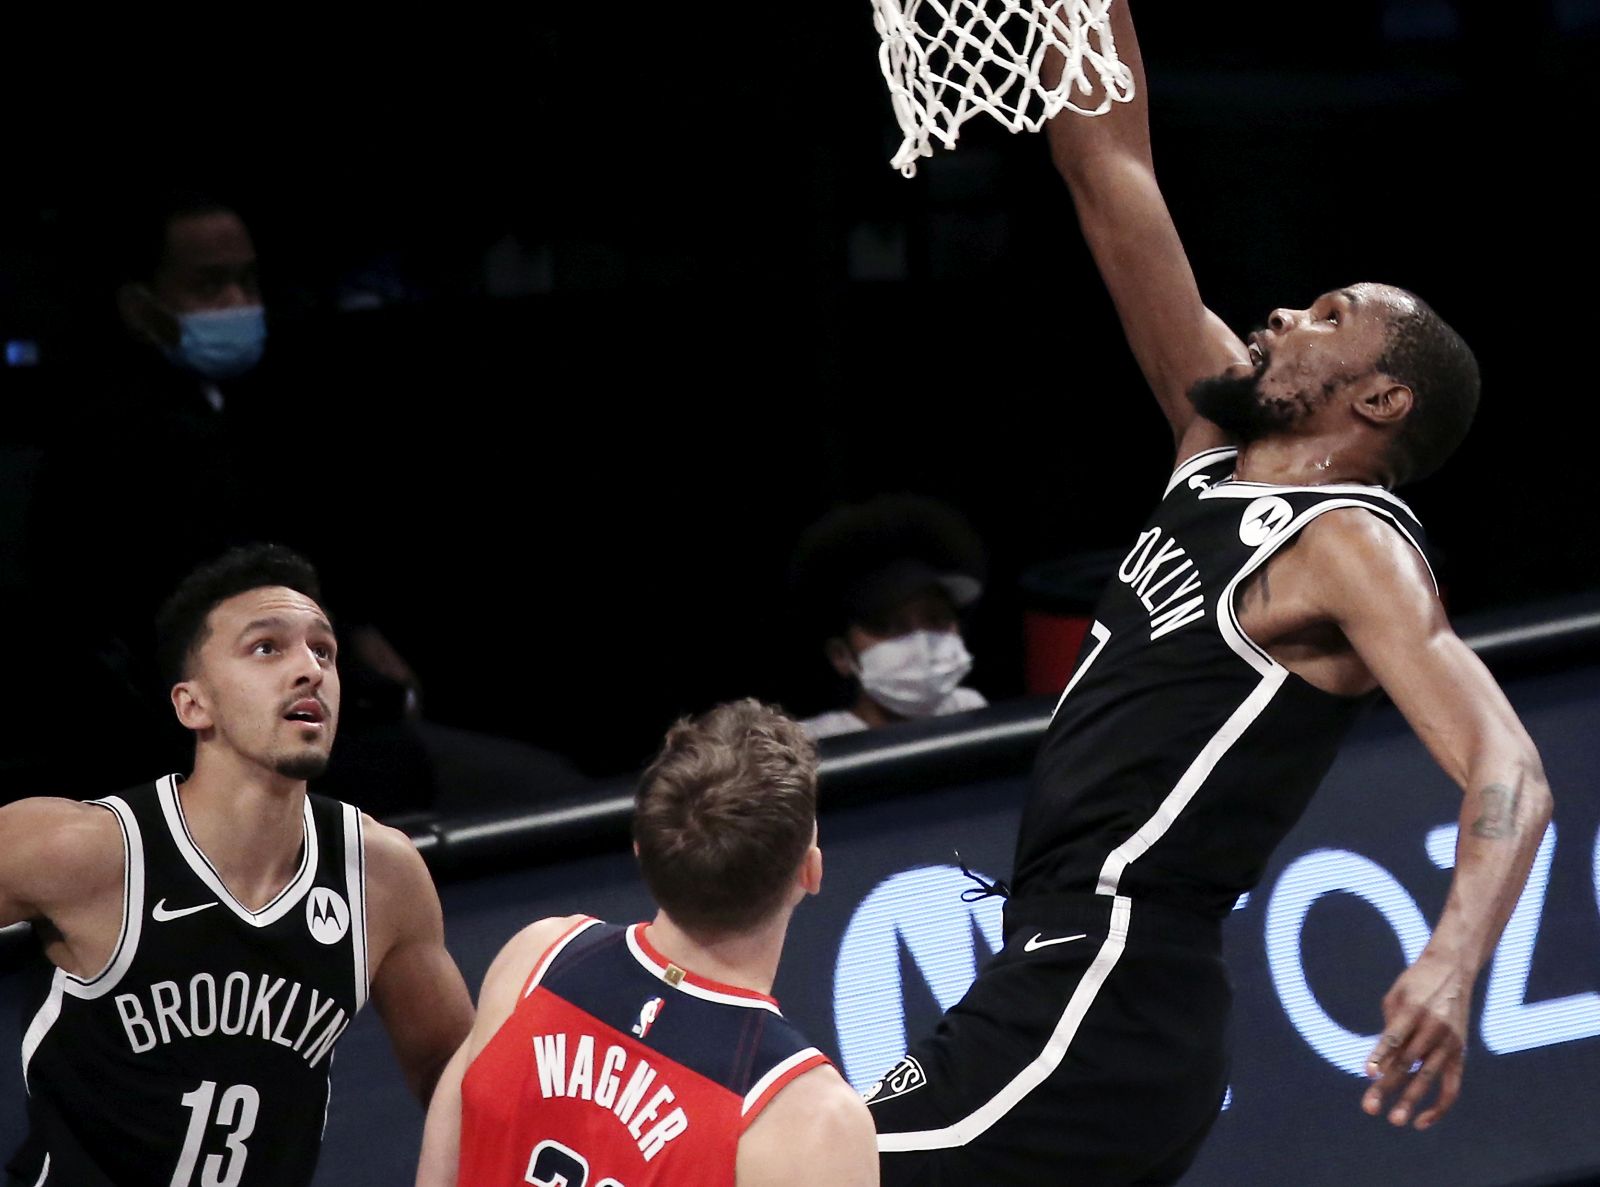 epa08882931 Brooklyn Nets forward Kevin Durant (R) shoots and scores during the first half of a  preseason game between the Washington Wizards and the Brooklyn Nets at Barclays Center in Brooklyn, New York, USA, 13 December 2020.  EPA/Peter Foley  SHUTTERSTOCK OUT